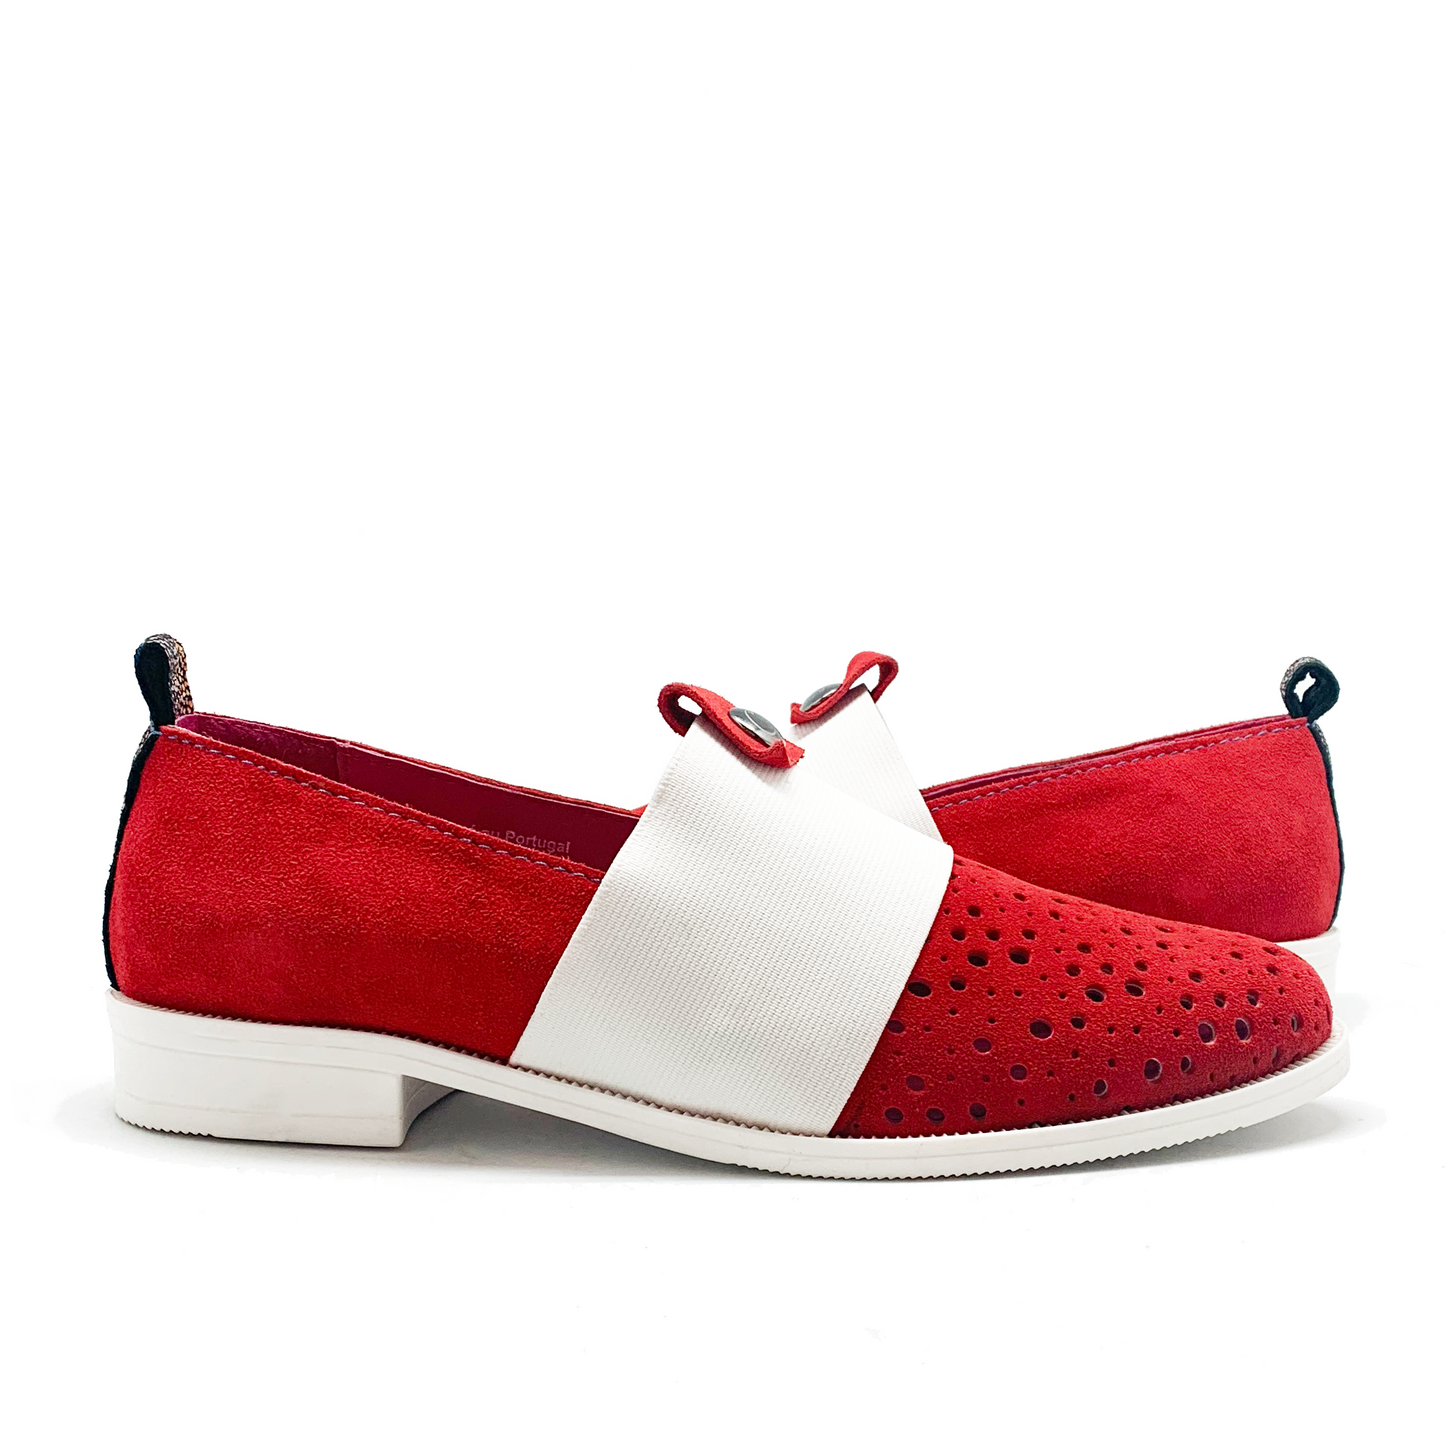 Red perforated suede slip on shoes with white elastic strap. 